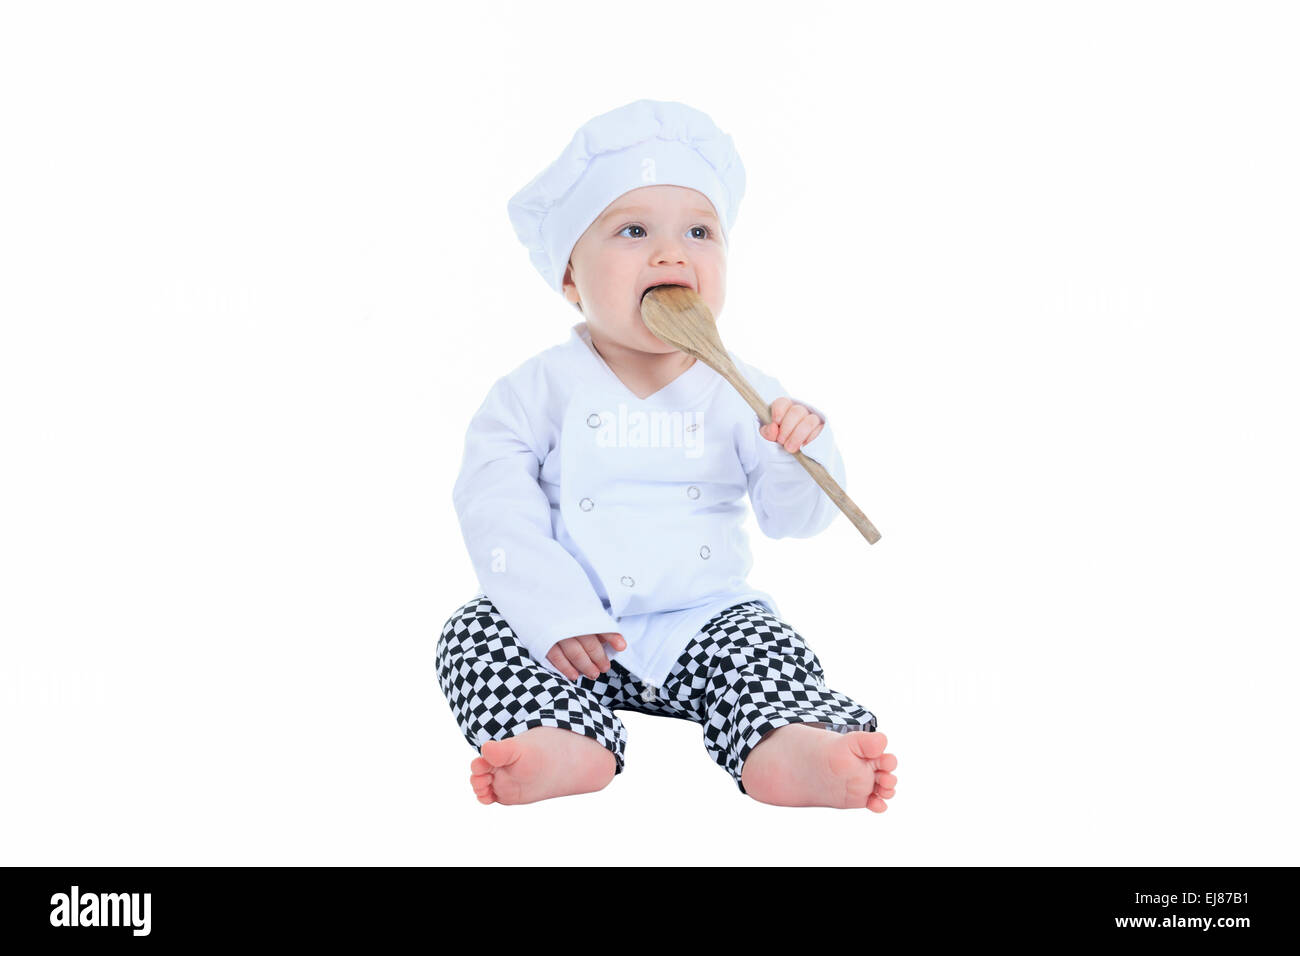 Cute little cook boy in front of a white background Stock Photo